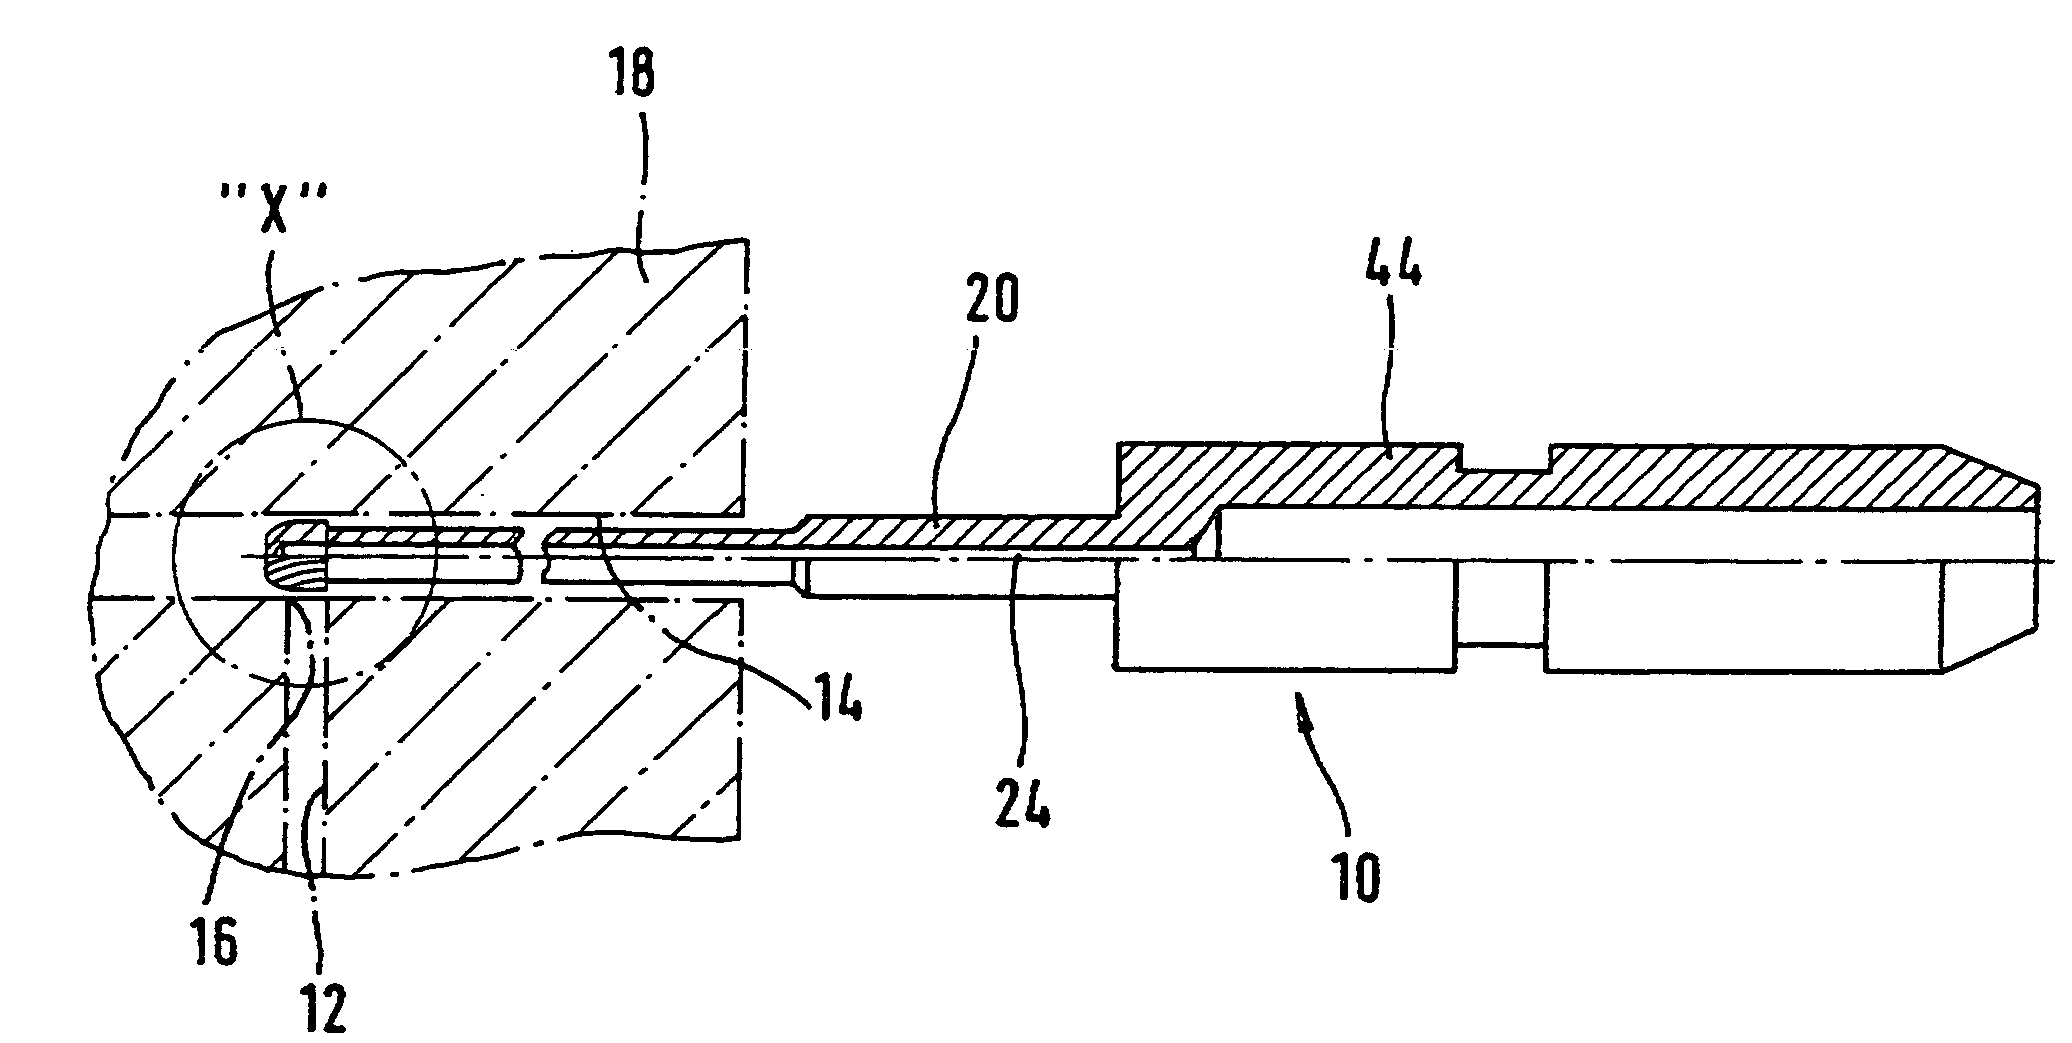 Tool, method, and apparatus for removing burrs from bores